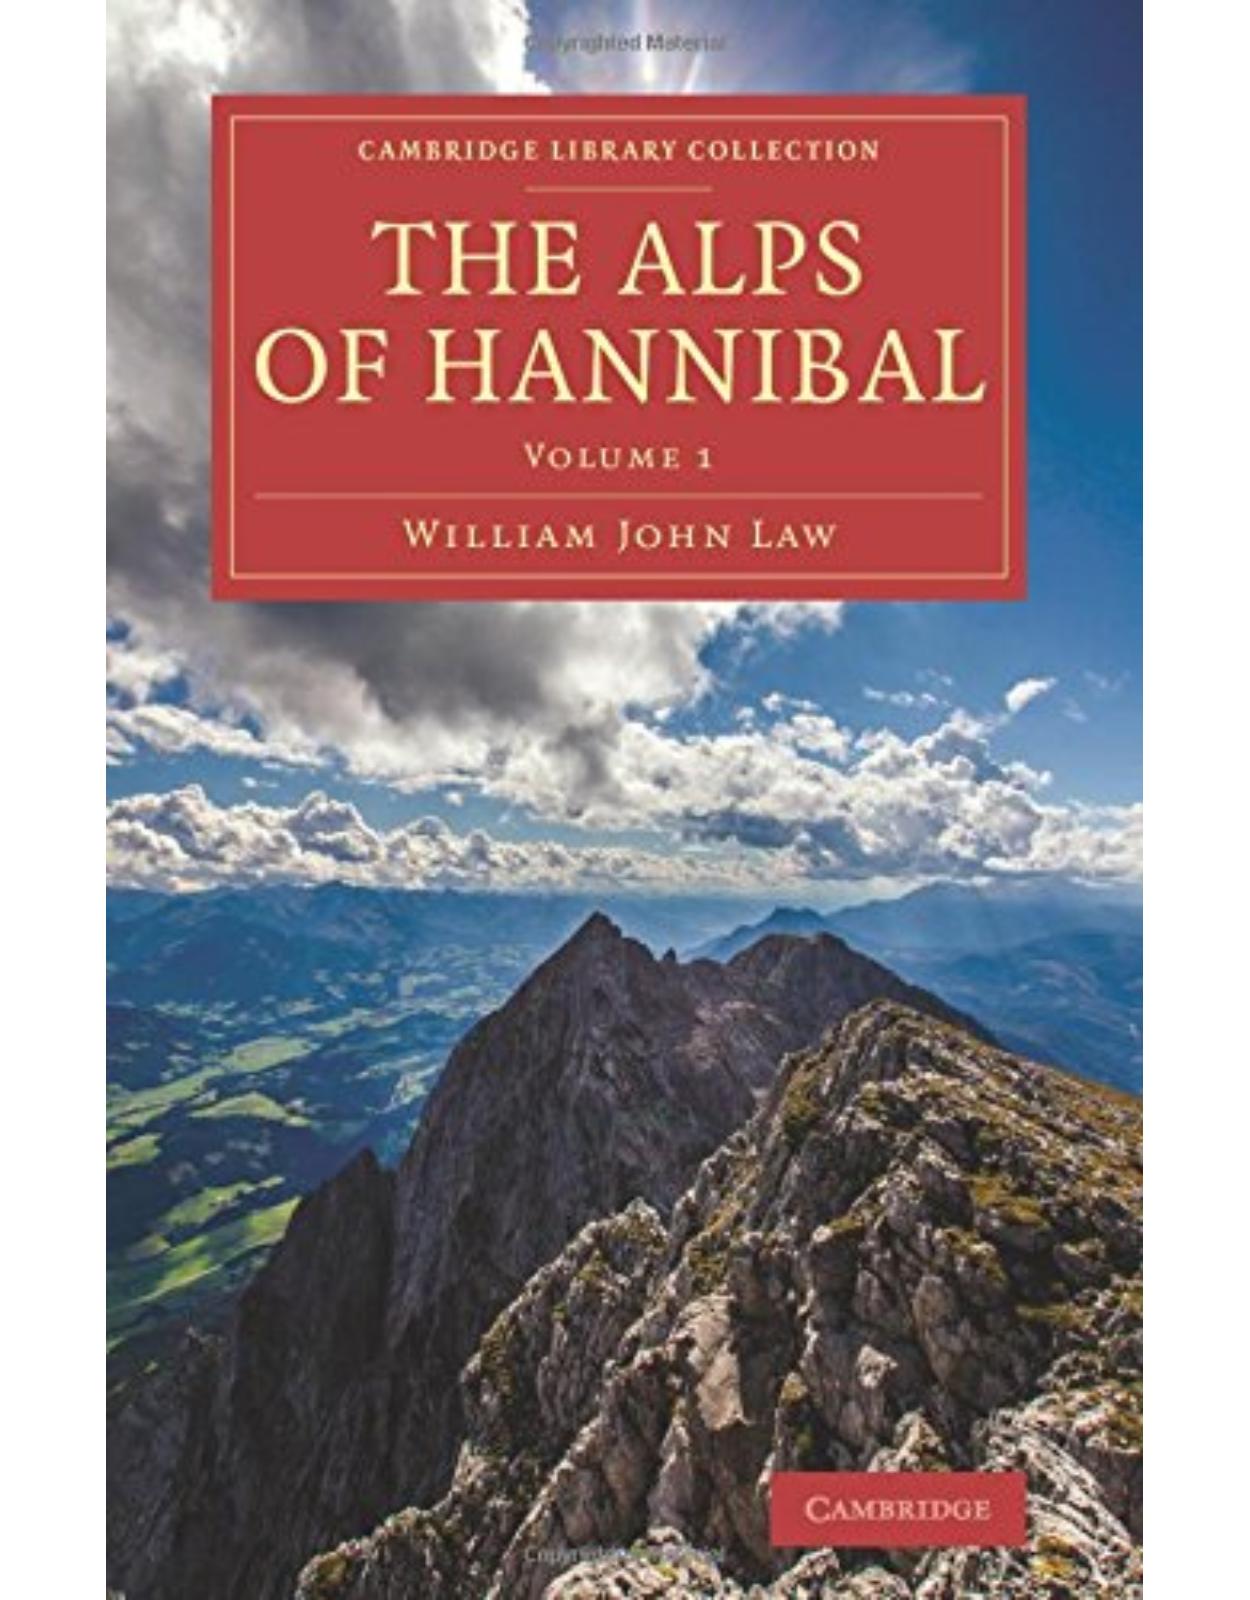 The Alps of Hannibal 2 Volume Set (Cambridge Library Collection - Classics)